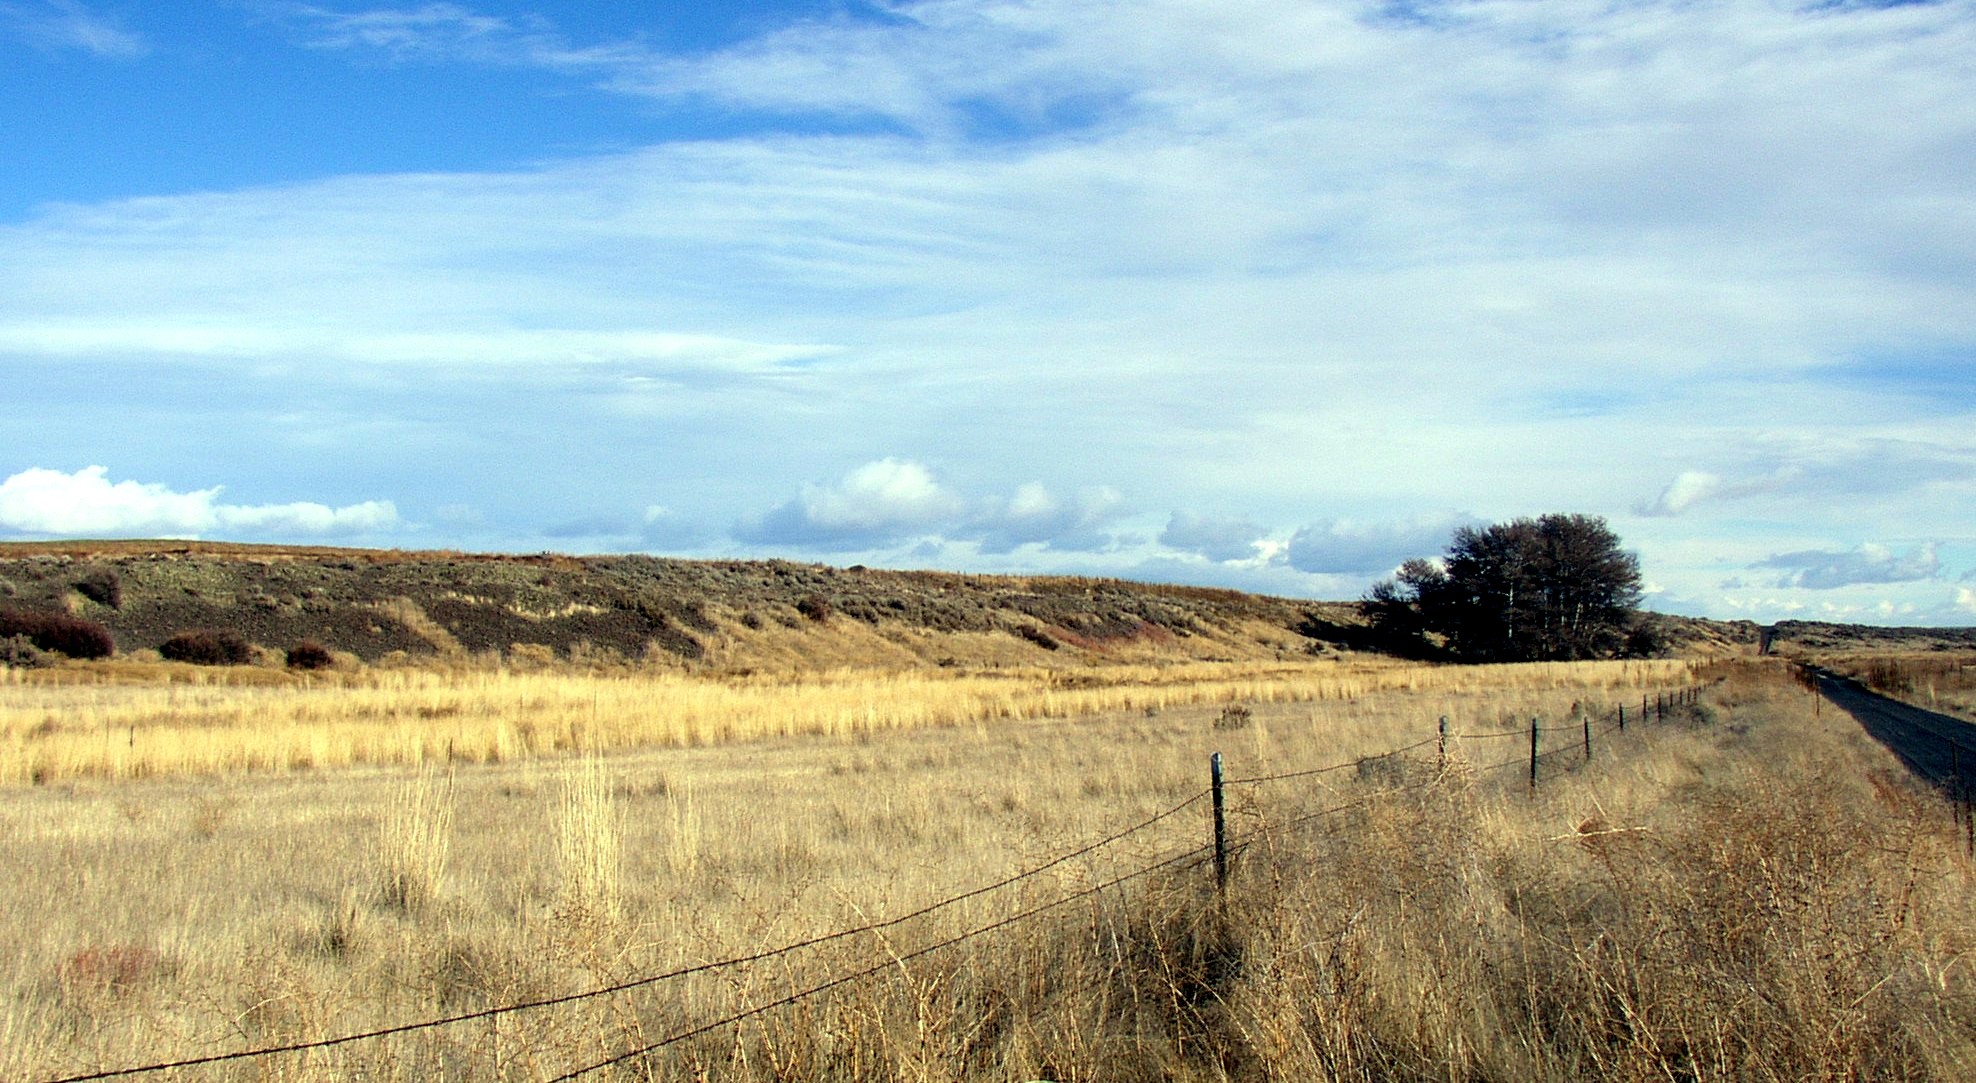 Photograph of an esker in Washington. The photo shows a long, low ridge in the background (the esker) with a flat landscape covered in dry, yellow grass in the foreground. 